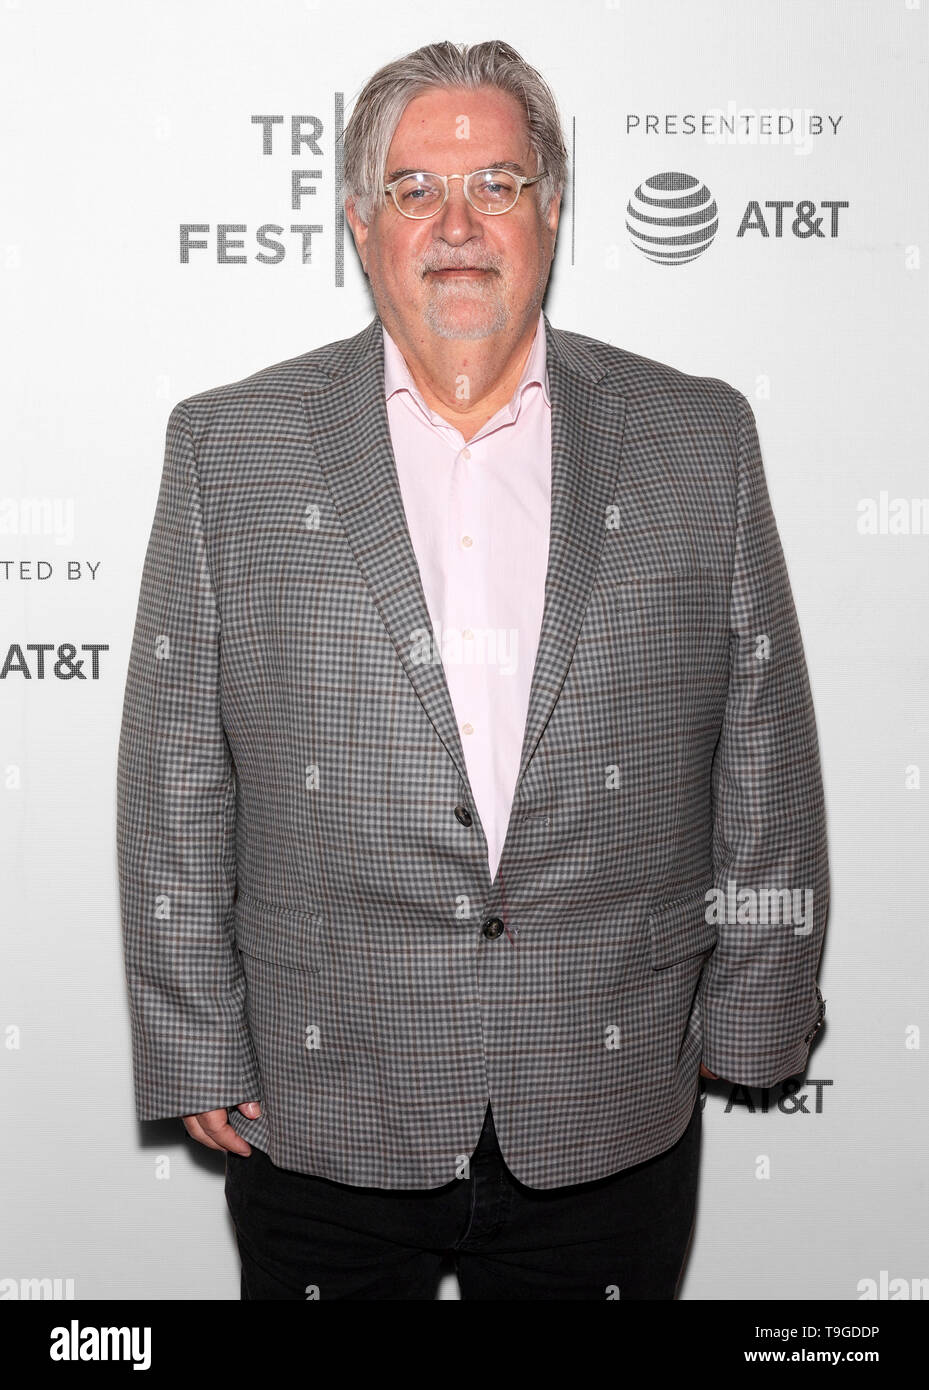 New York, NY - April 28, 2019: 'The Simpsons' creator Matt Groening attends 'The Simpsons' 30th Anniversary celebration during the 2019 Tribeca Film F Stock Photo